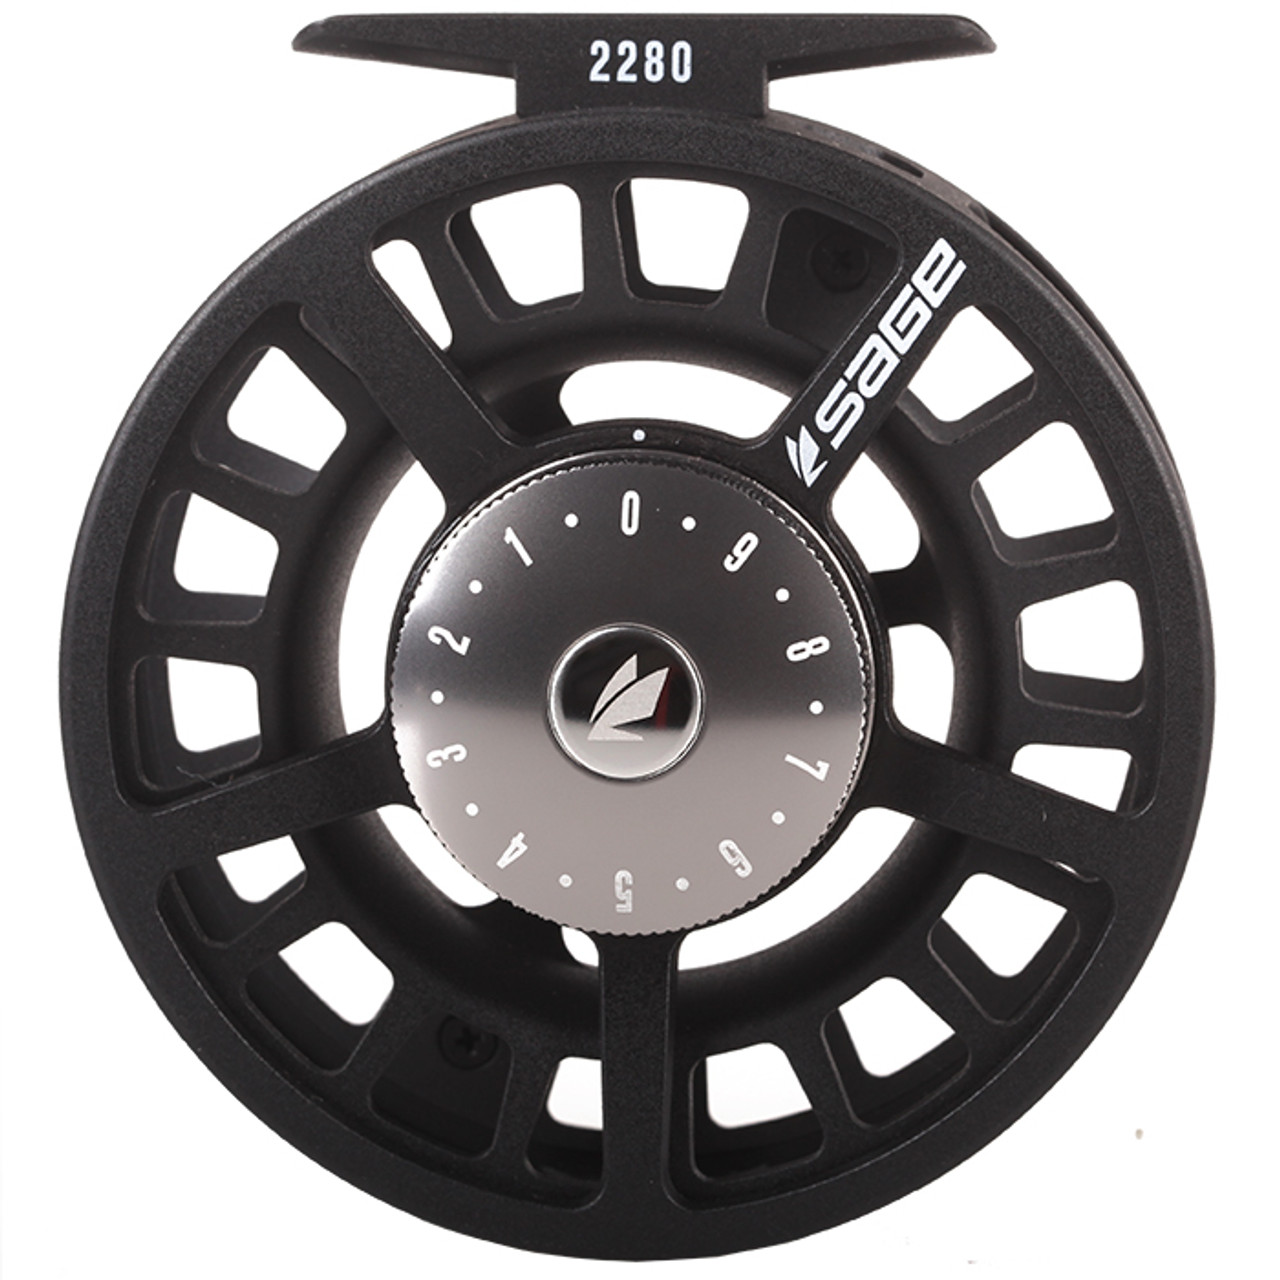 2280 Reel Black/Platinum 7-8w36643 - Gordy & Sons Outfitters